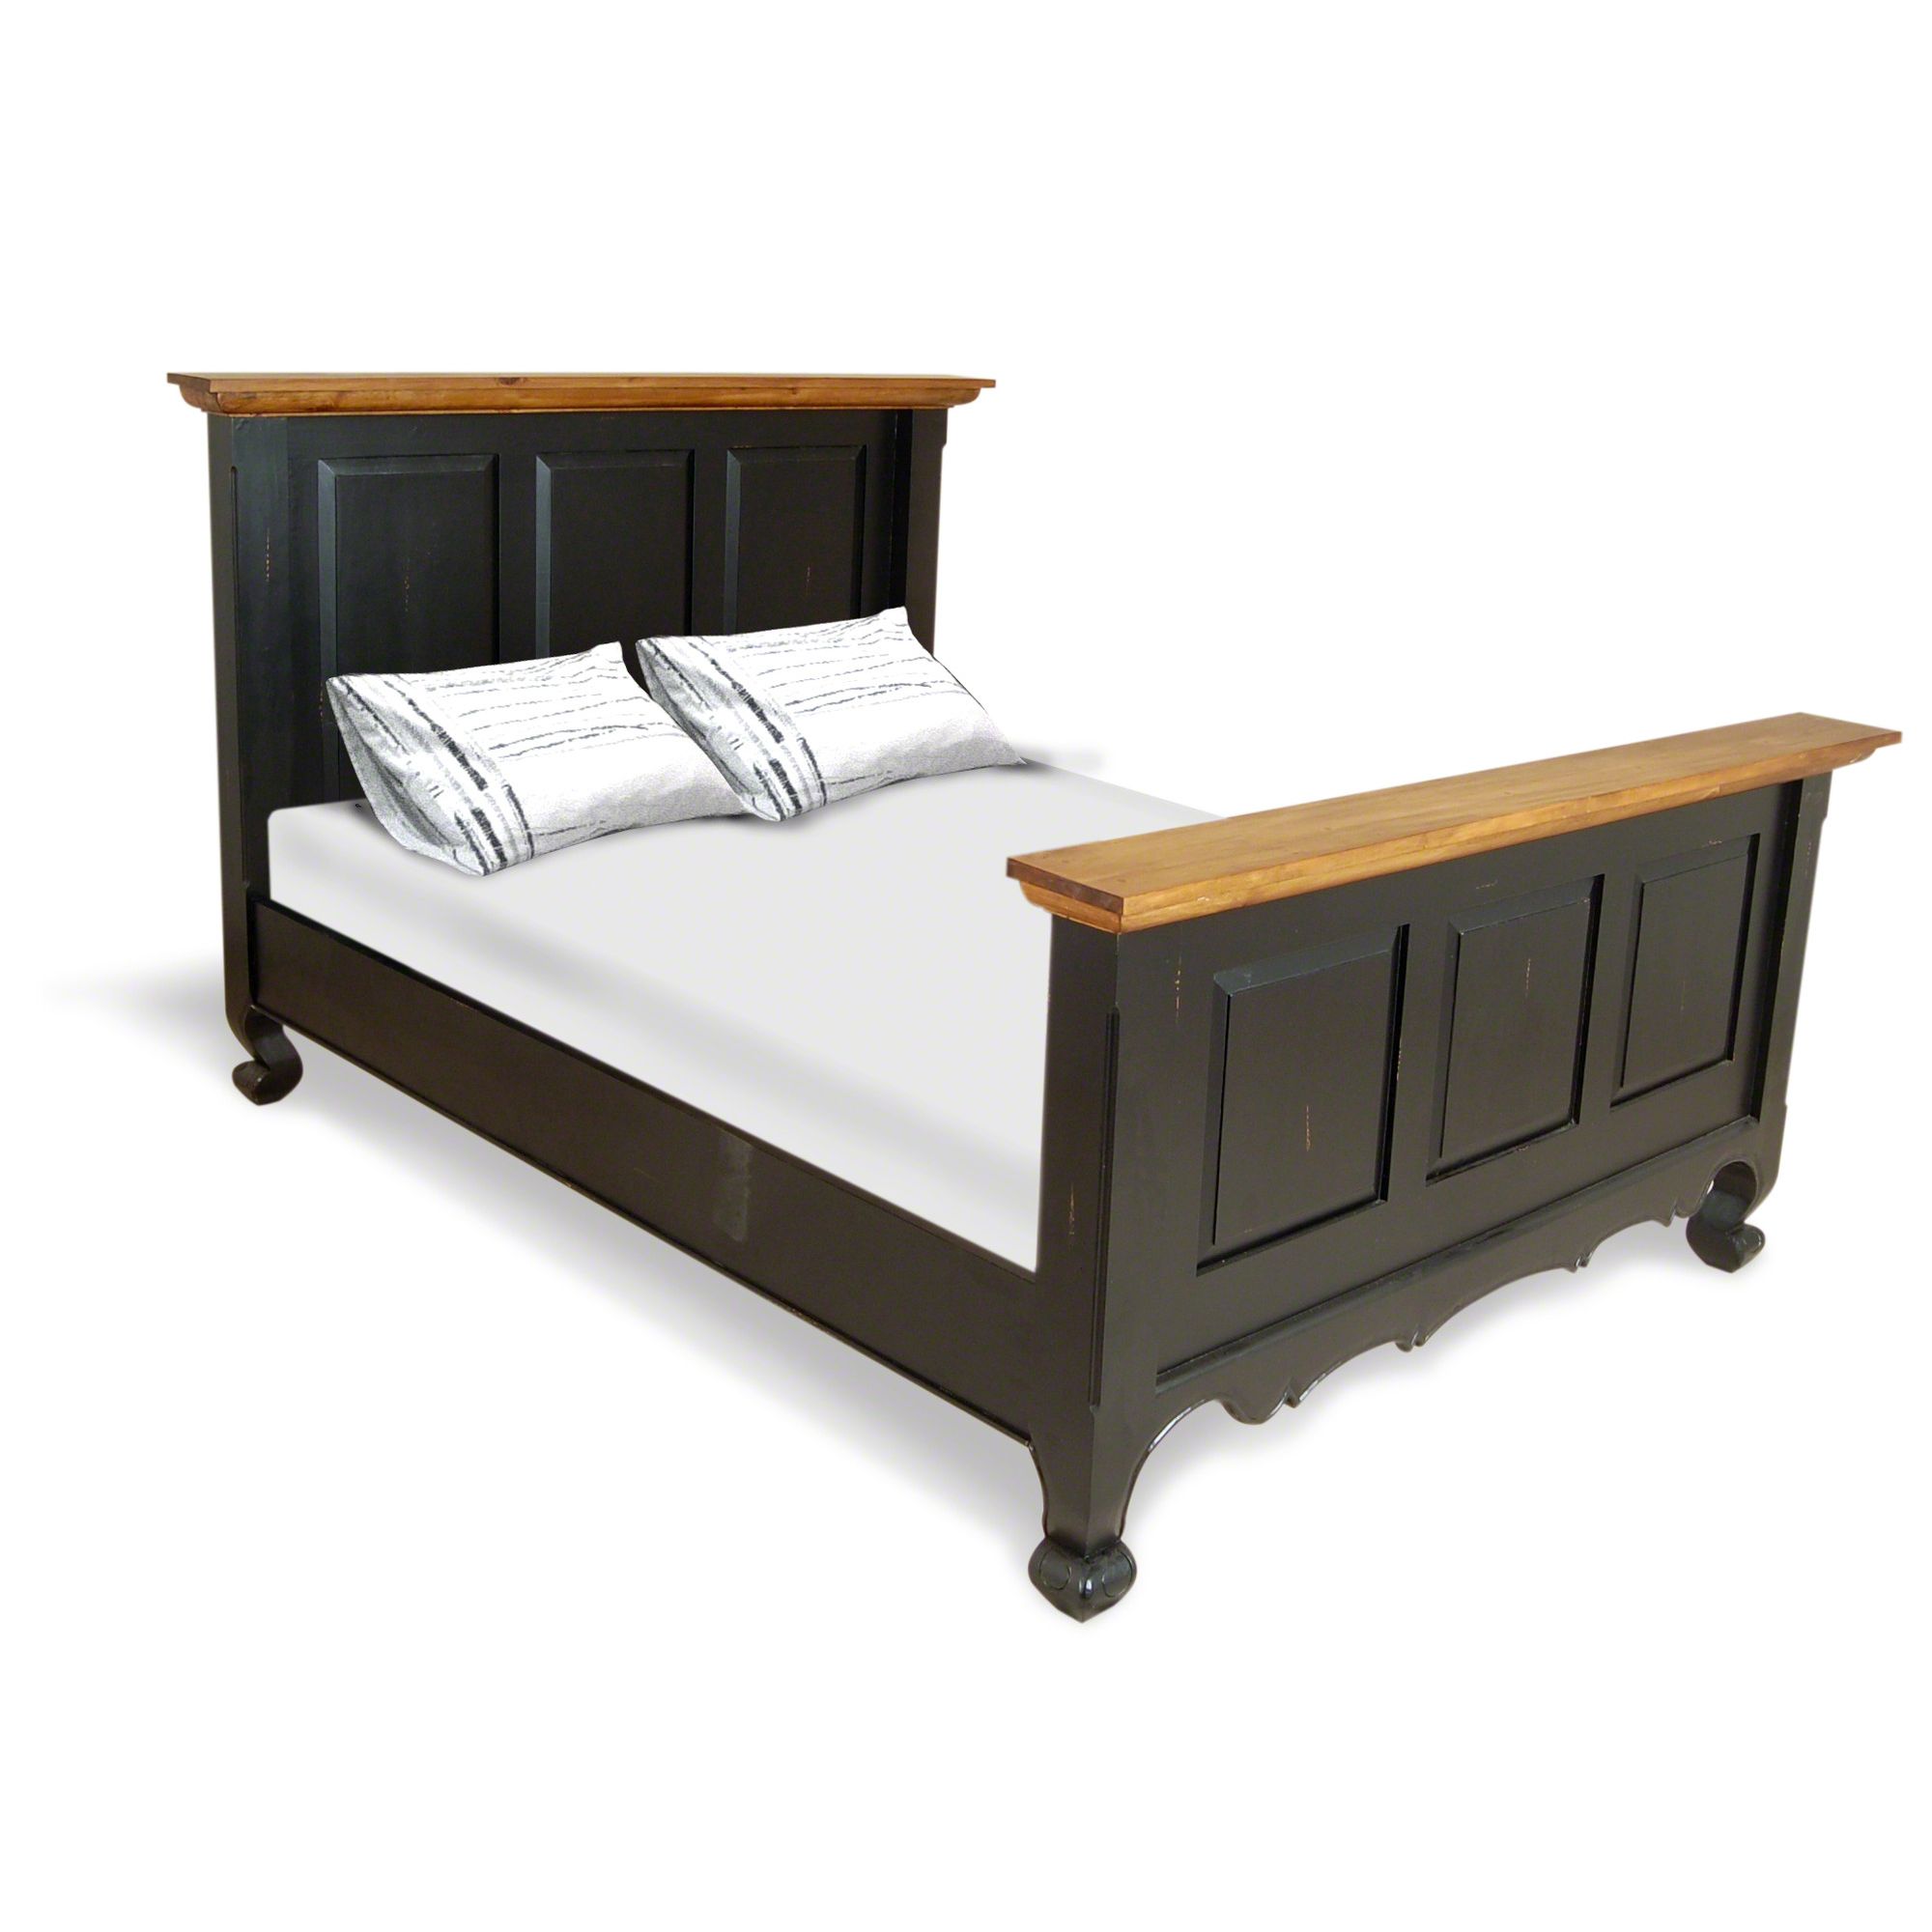 Oceans Apart Provence Aries Bed Frame at Tesco Direct